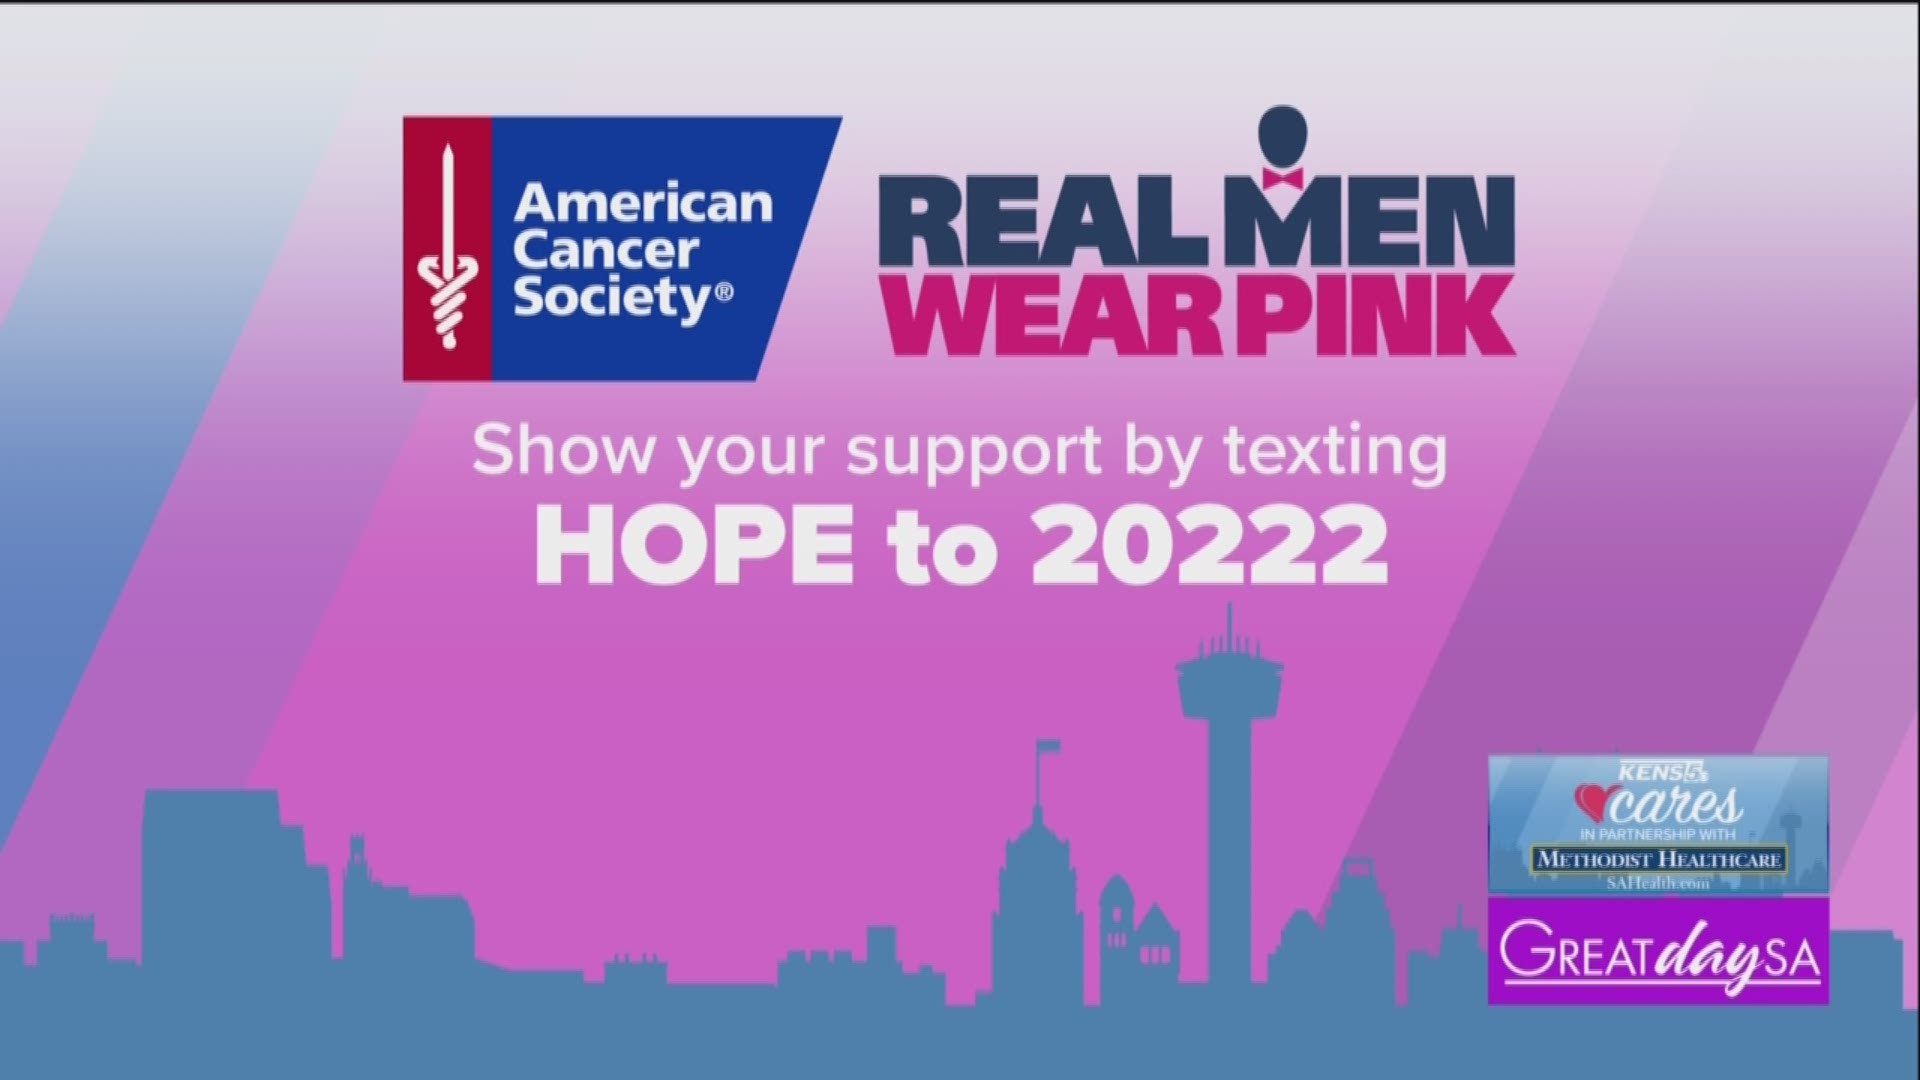 KENS Cares about our community! Share your Real Men Wear Pink photos and videos by using #kens5eyewitness or emailing to eyewitness@kens5.com.